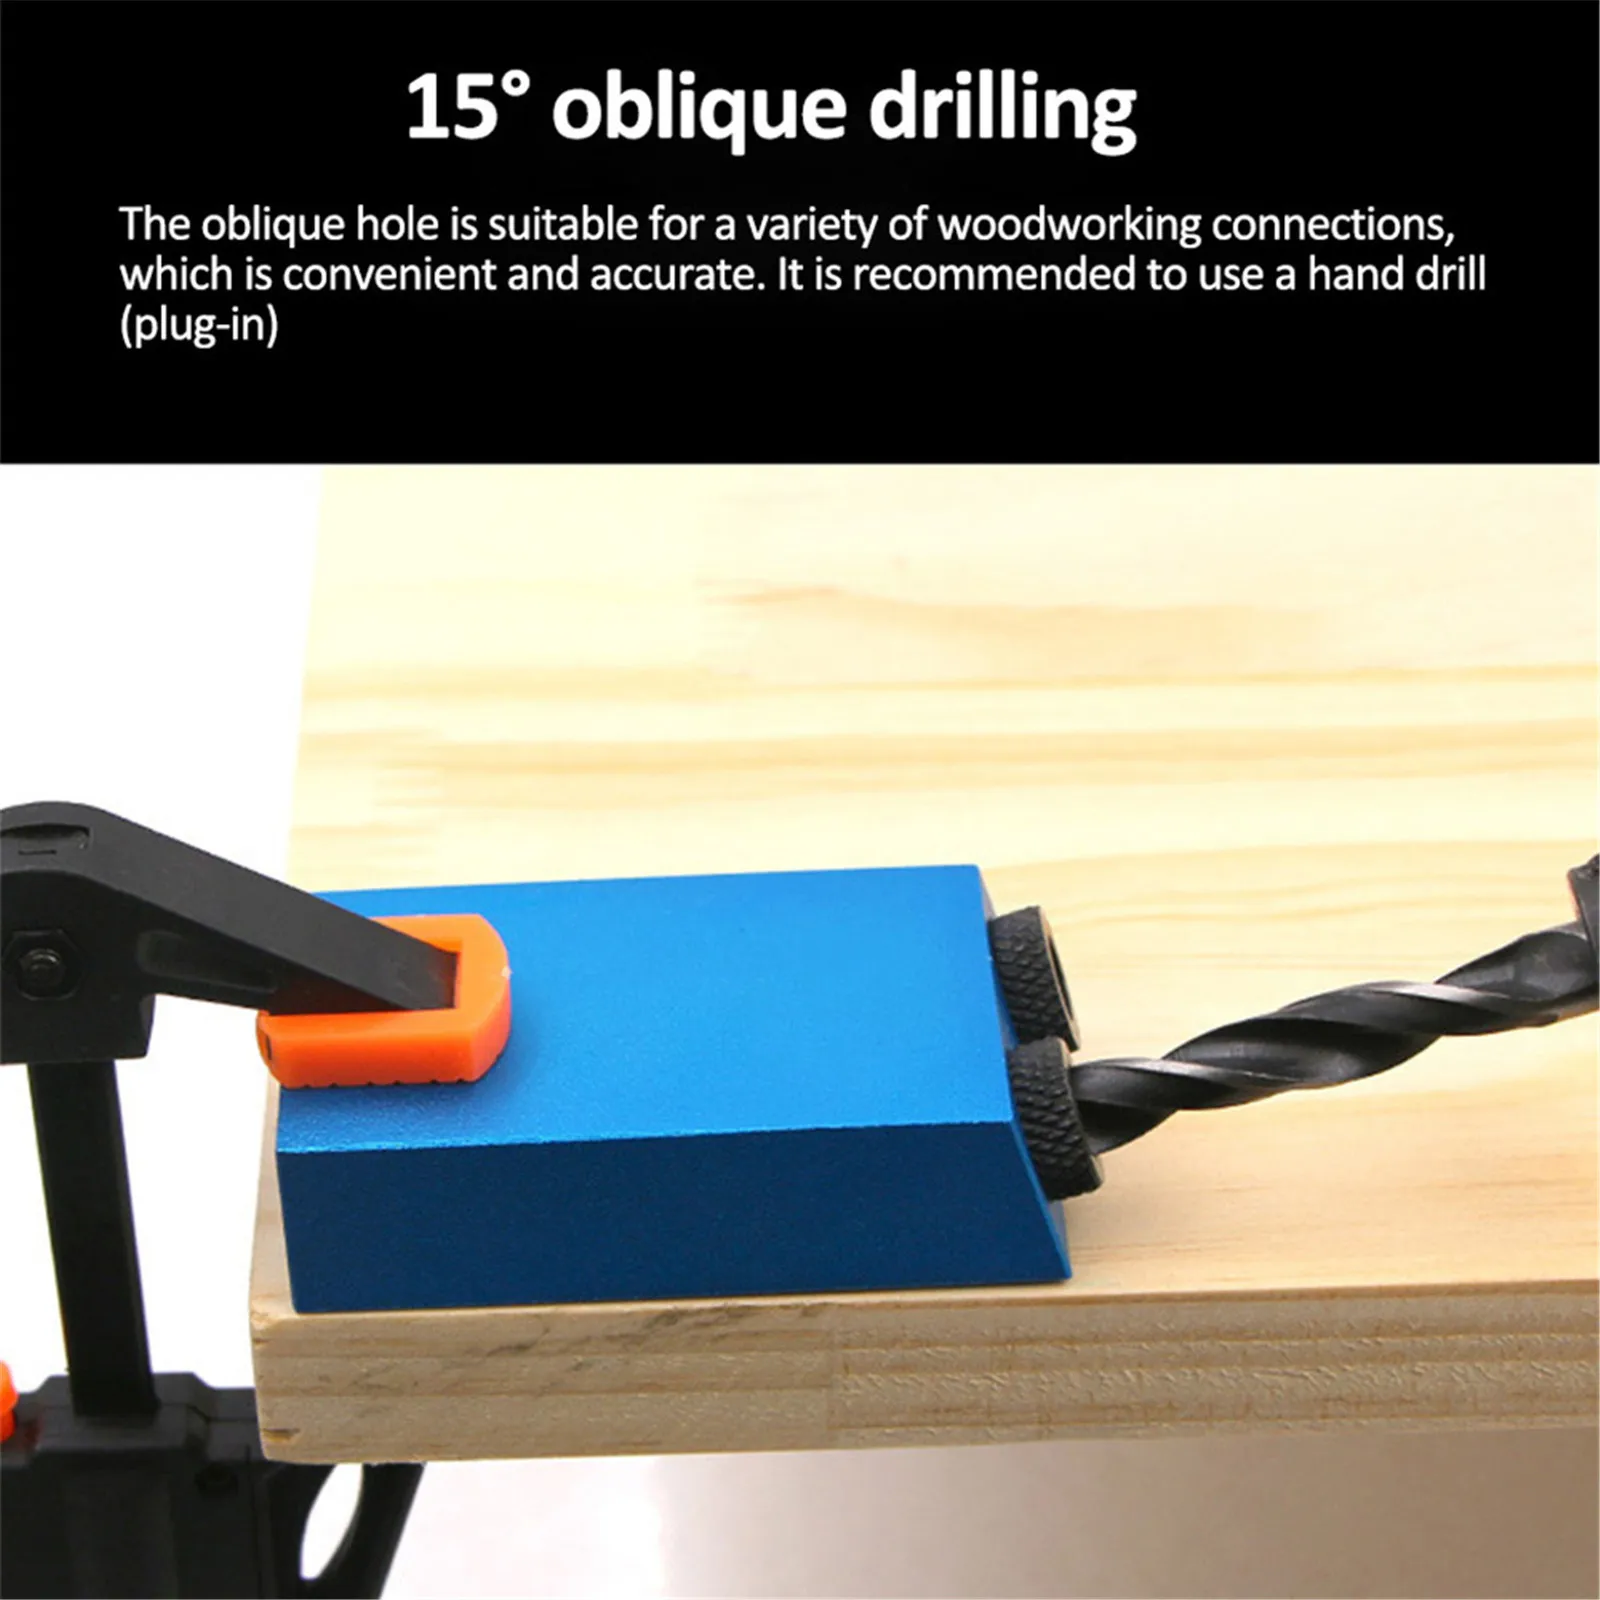 15 Degrees Hole Jig Kit Woodworking Hole Punch Locator Hole Puncher Locator Jig Woodworking Tool woodworking oblique hole locator drill bits pocket hole jig kit 15 degree angle drill guide set hole puncher diy carpentry tools